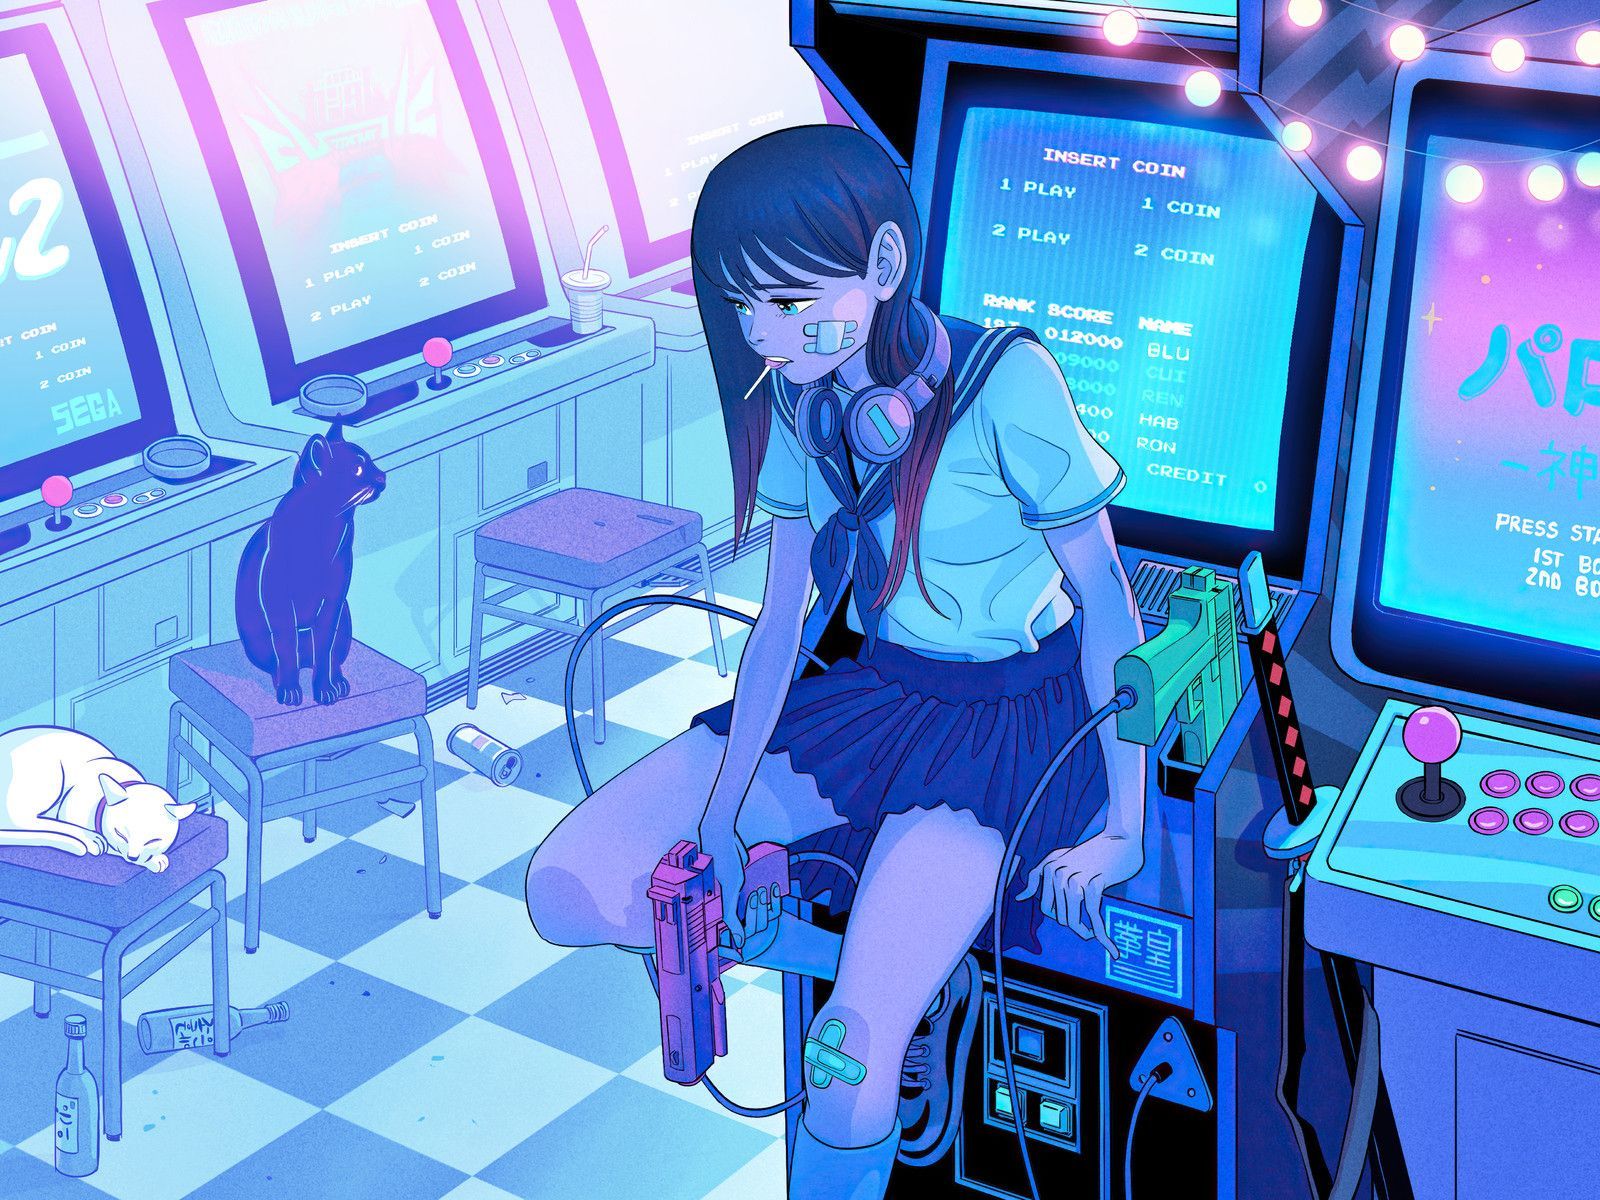 A girl in a school uniform sits on a coin-operated arcade game, holding a pink gun. - Anime girl, gaming